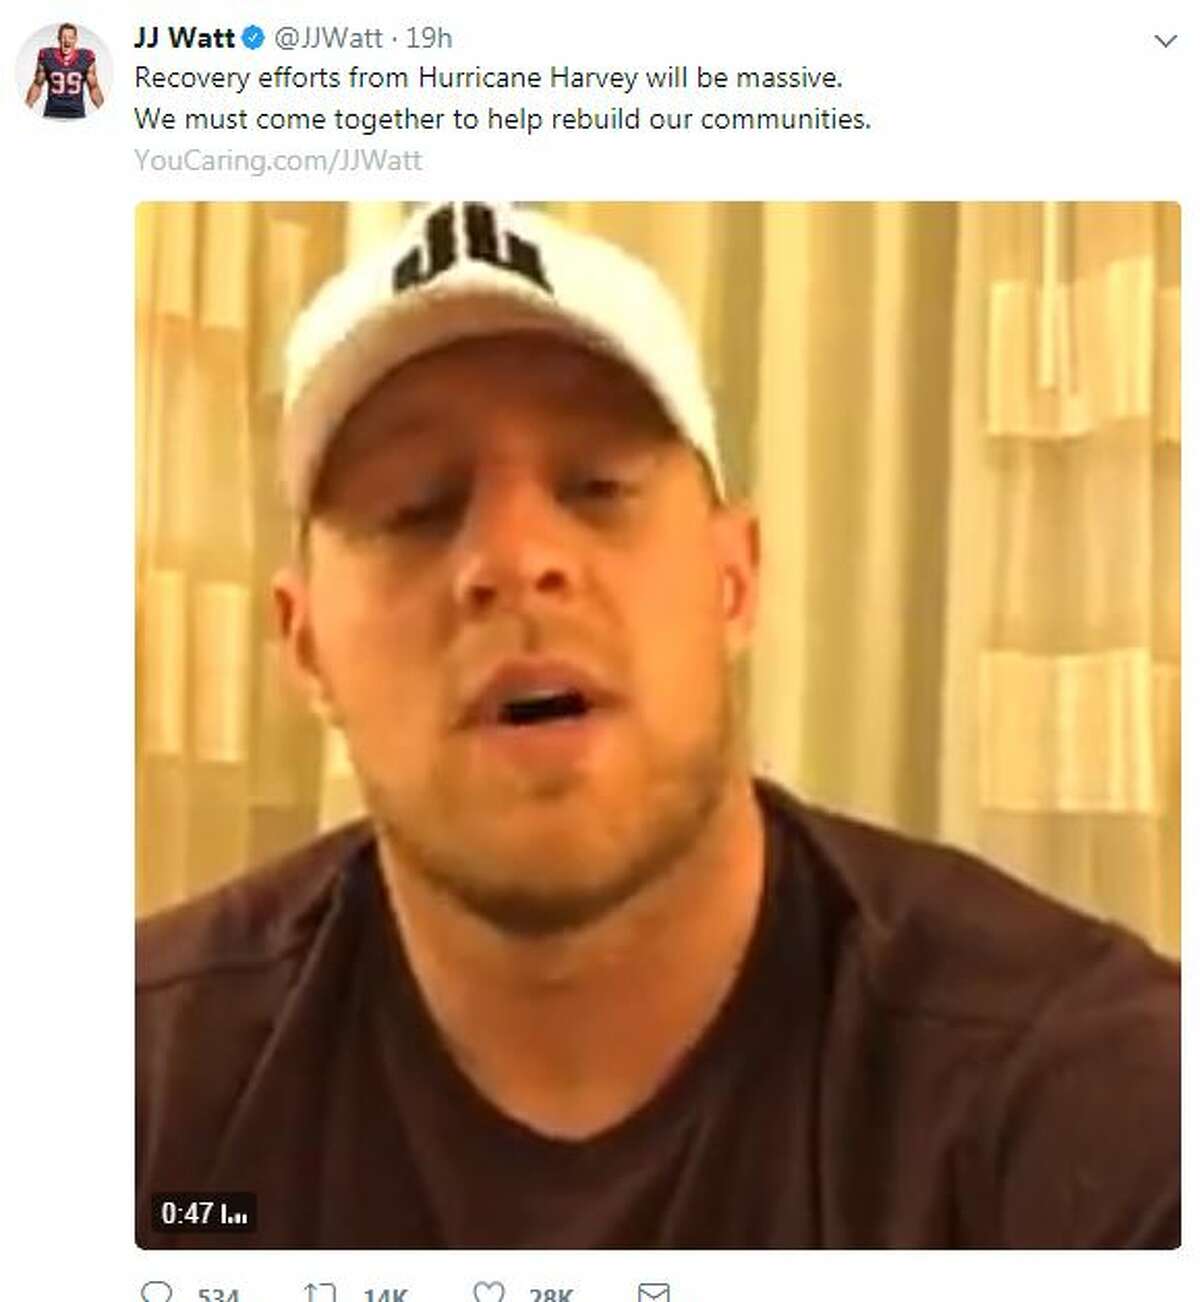 @JJWatt: Recovery efforts from Hurricane Harvey will be massive. We must come together to help rebuild our communities. http://YouCaring.com/JJWatt